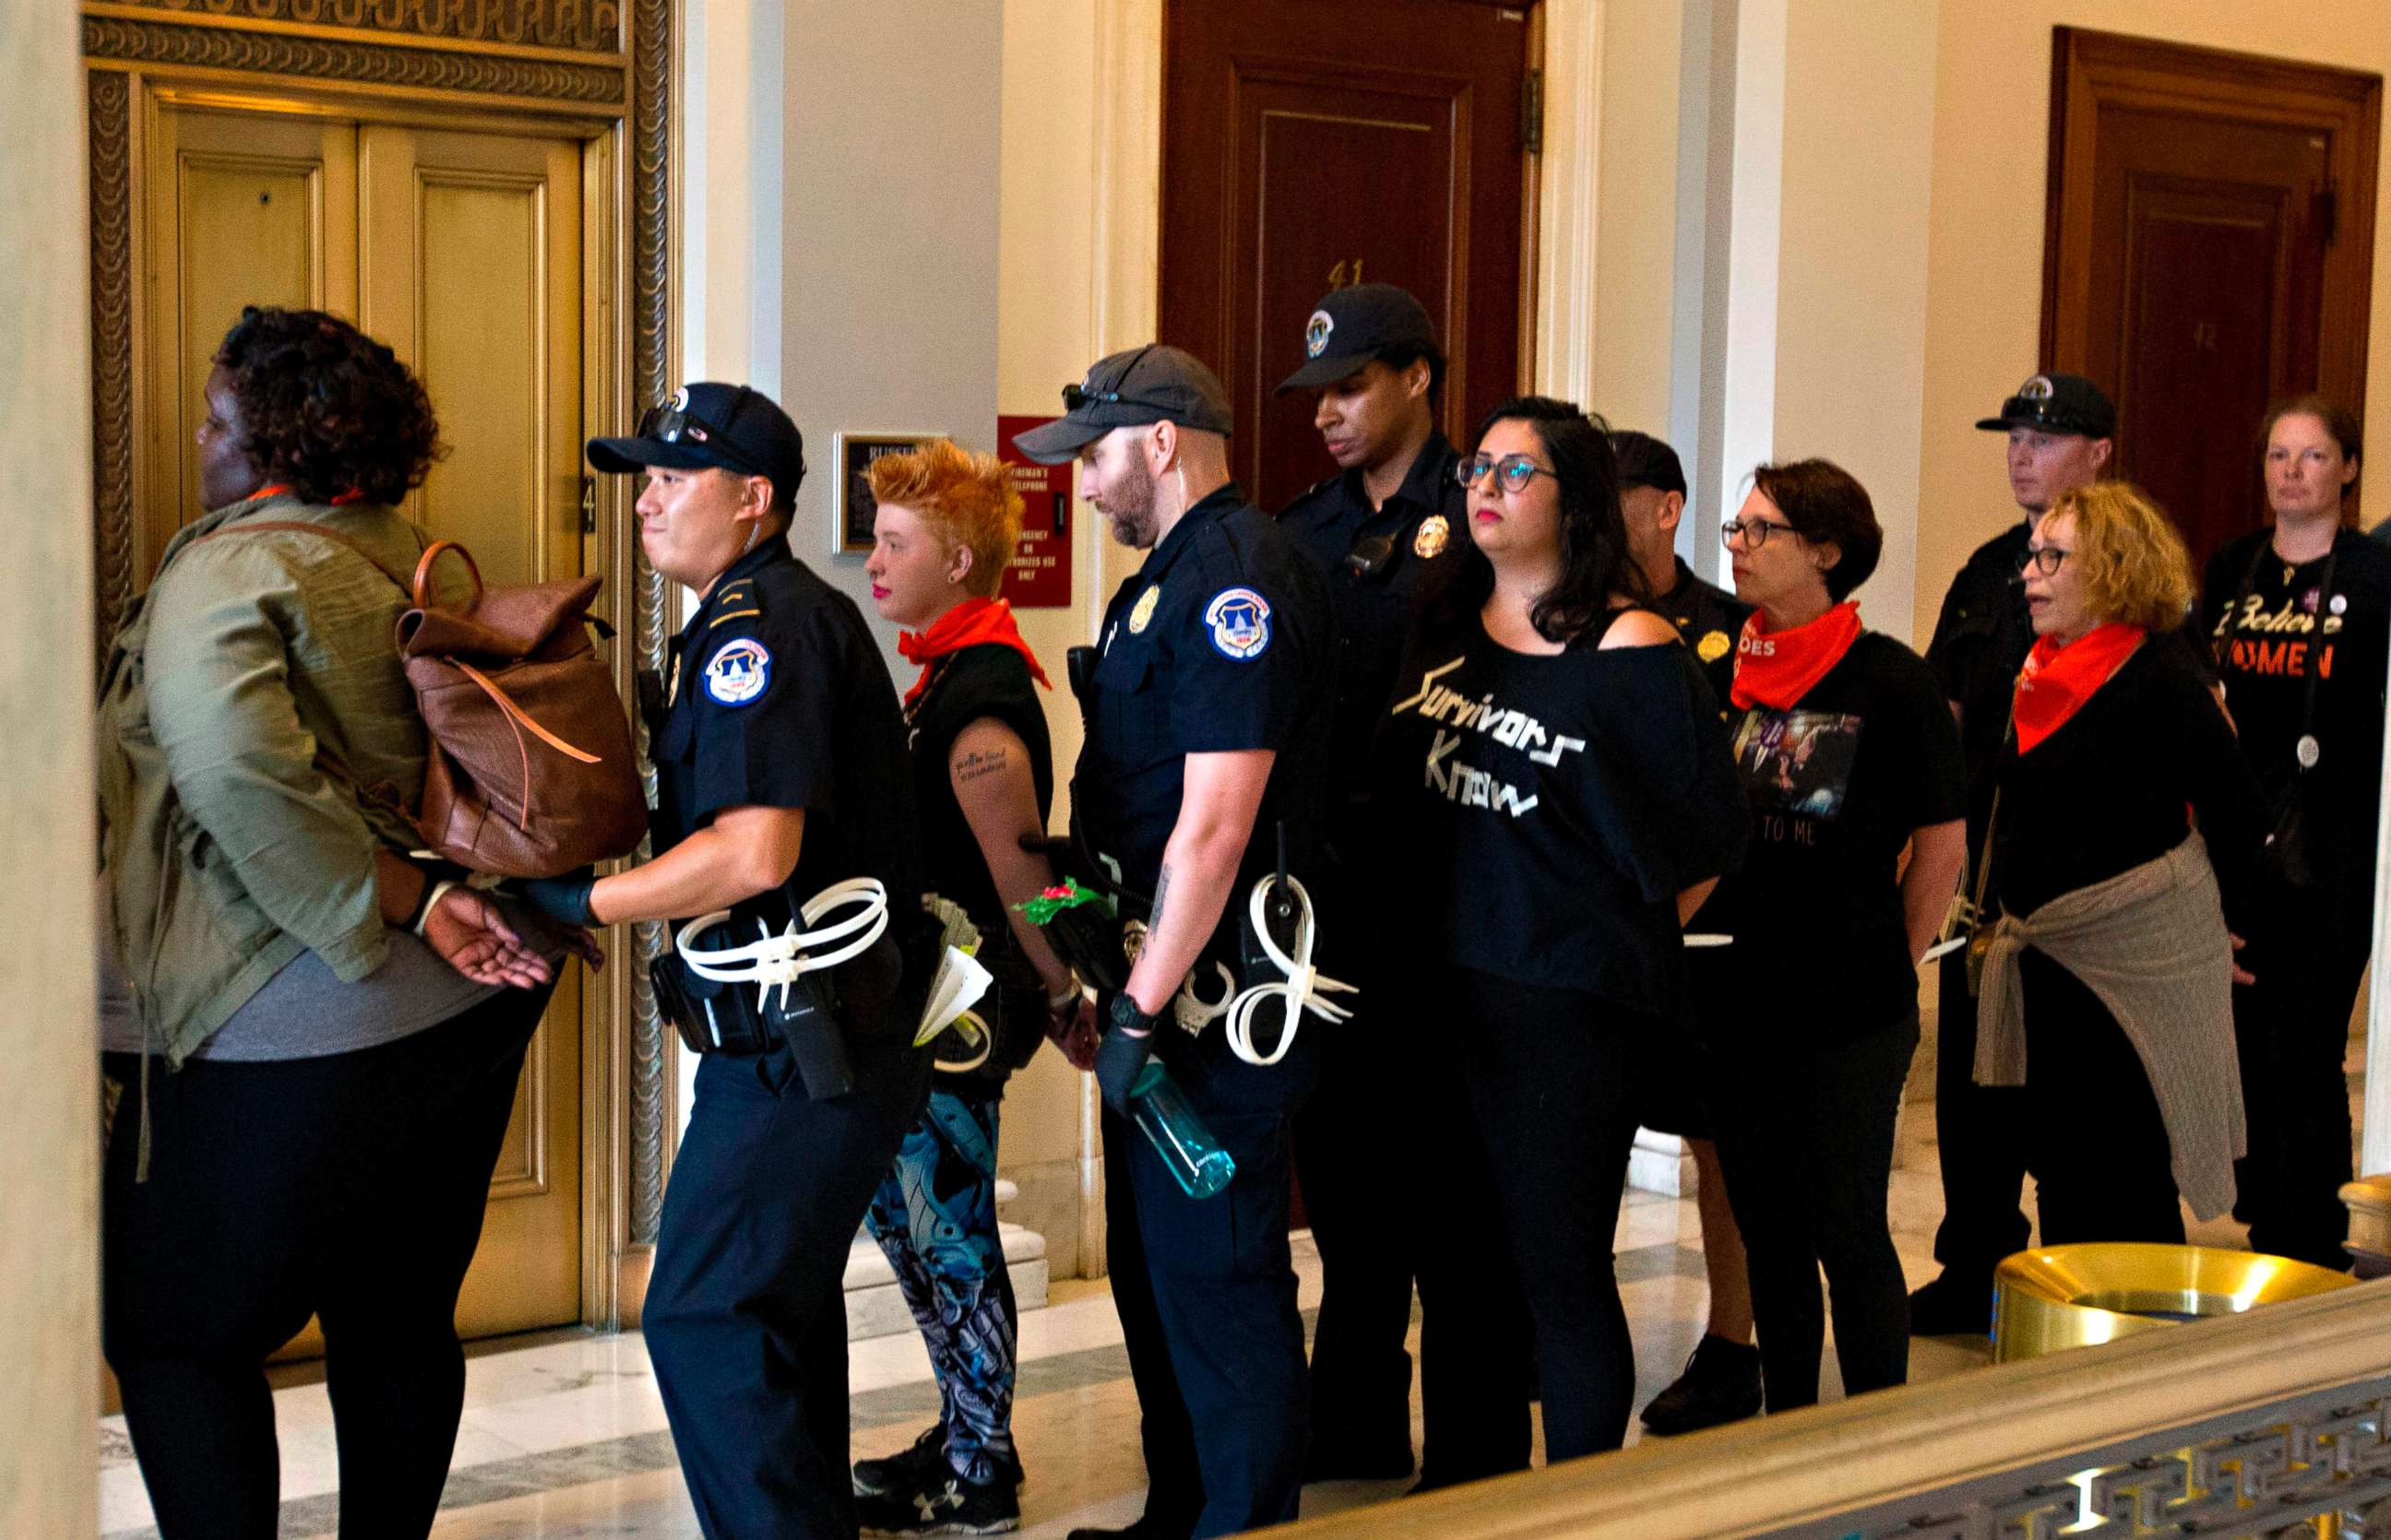 PHOTO: Protesters against US Supreme Court nominee Brett Kavanaugh are arrested after blocking the office of Senator Jeff Flakes, Republican of Arizona, in Washington on Oct. 5, 2018. 